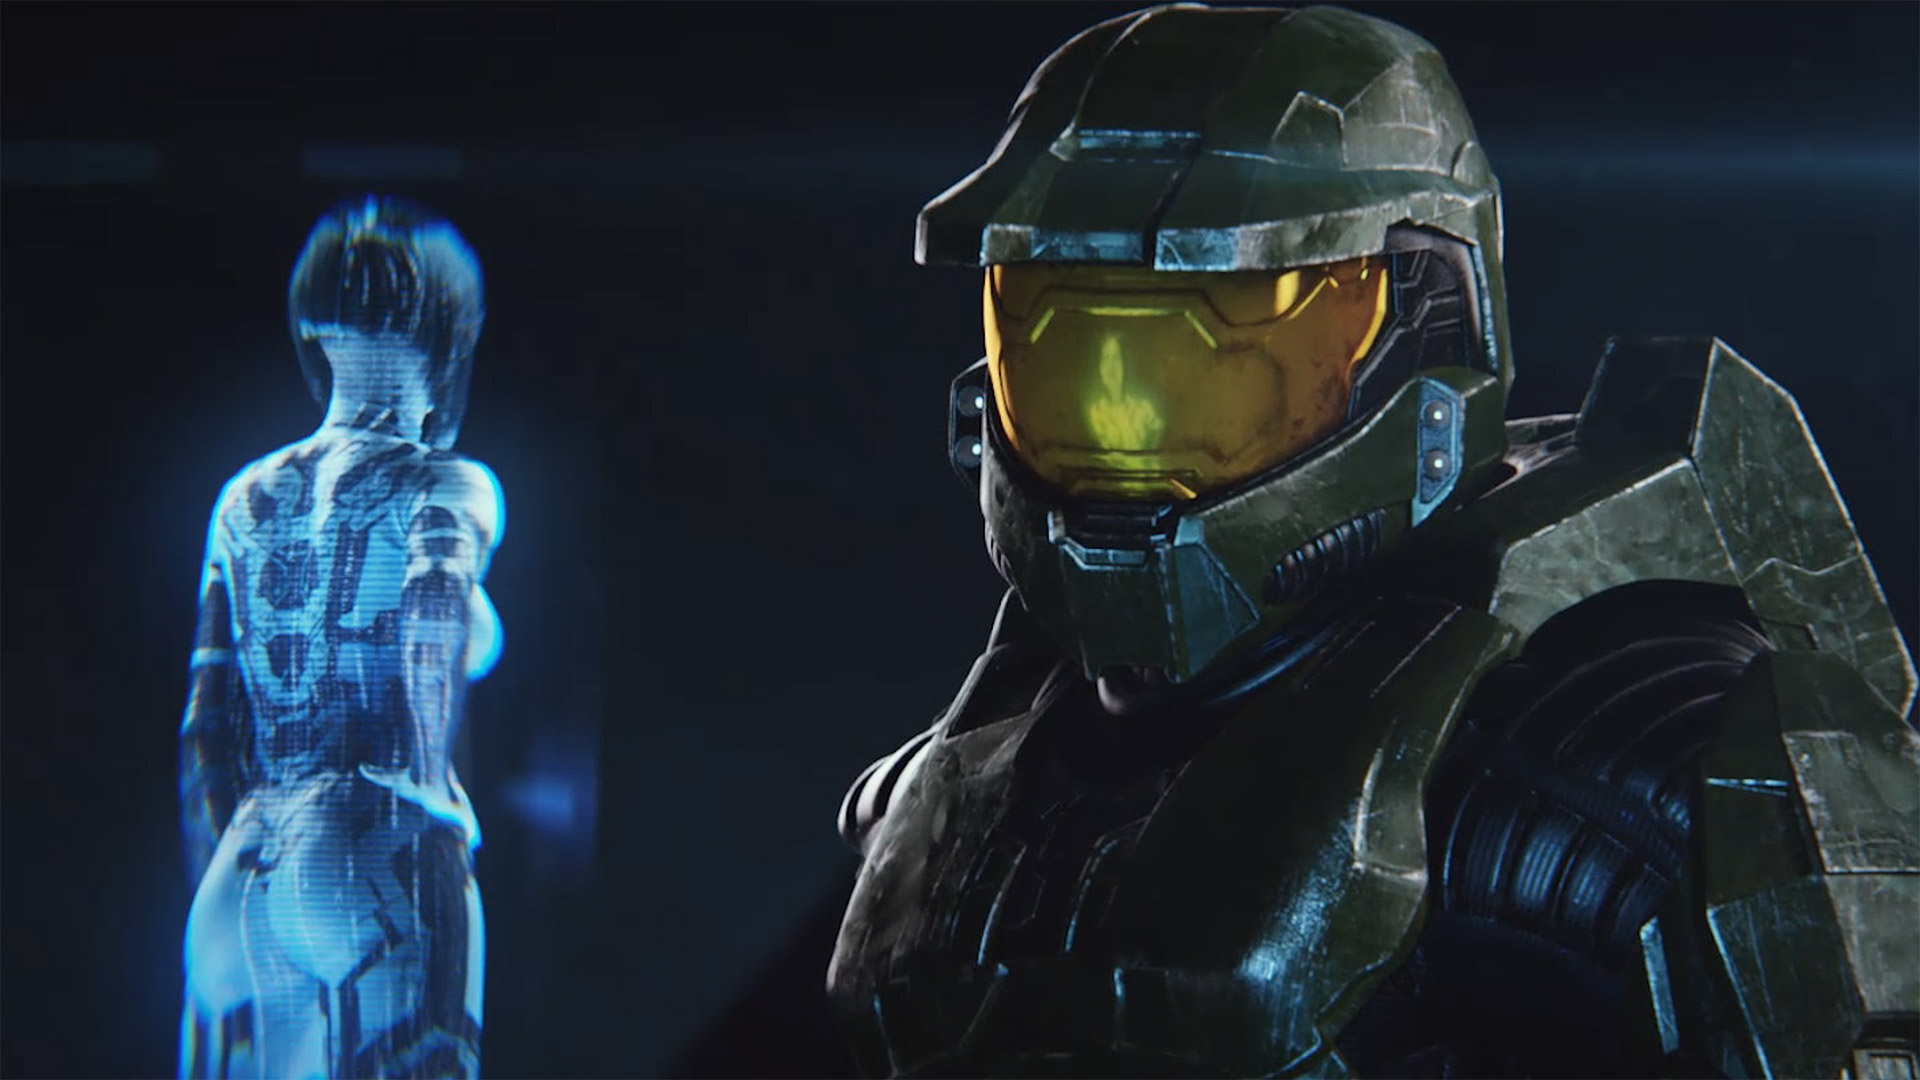 Free Halo 2, Exciting download, Retro gaming, Blast from the past, 1920x1080 Full HD Desktop